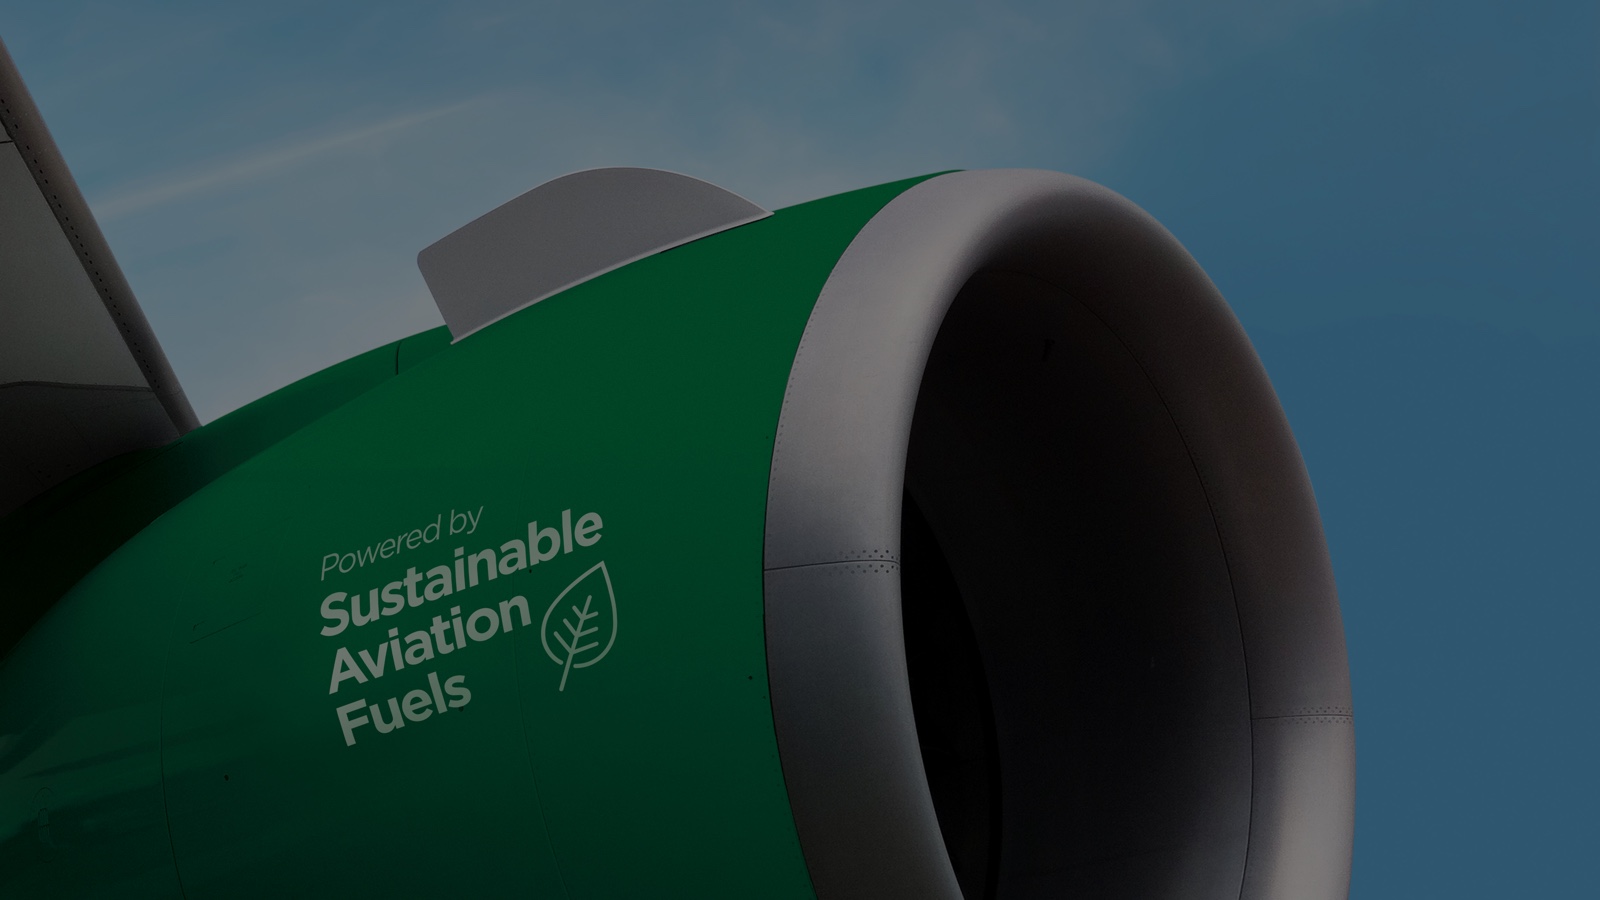 Power-to-Sustainable Aviation Fuel, technical challenges and opportunities to build a UK supply chain